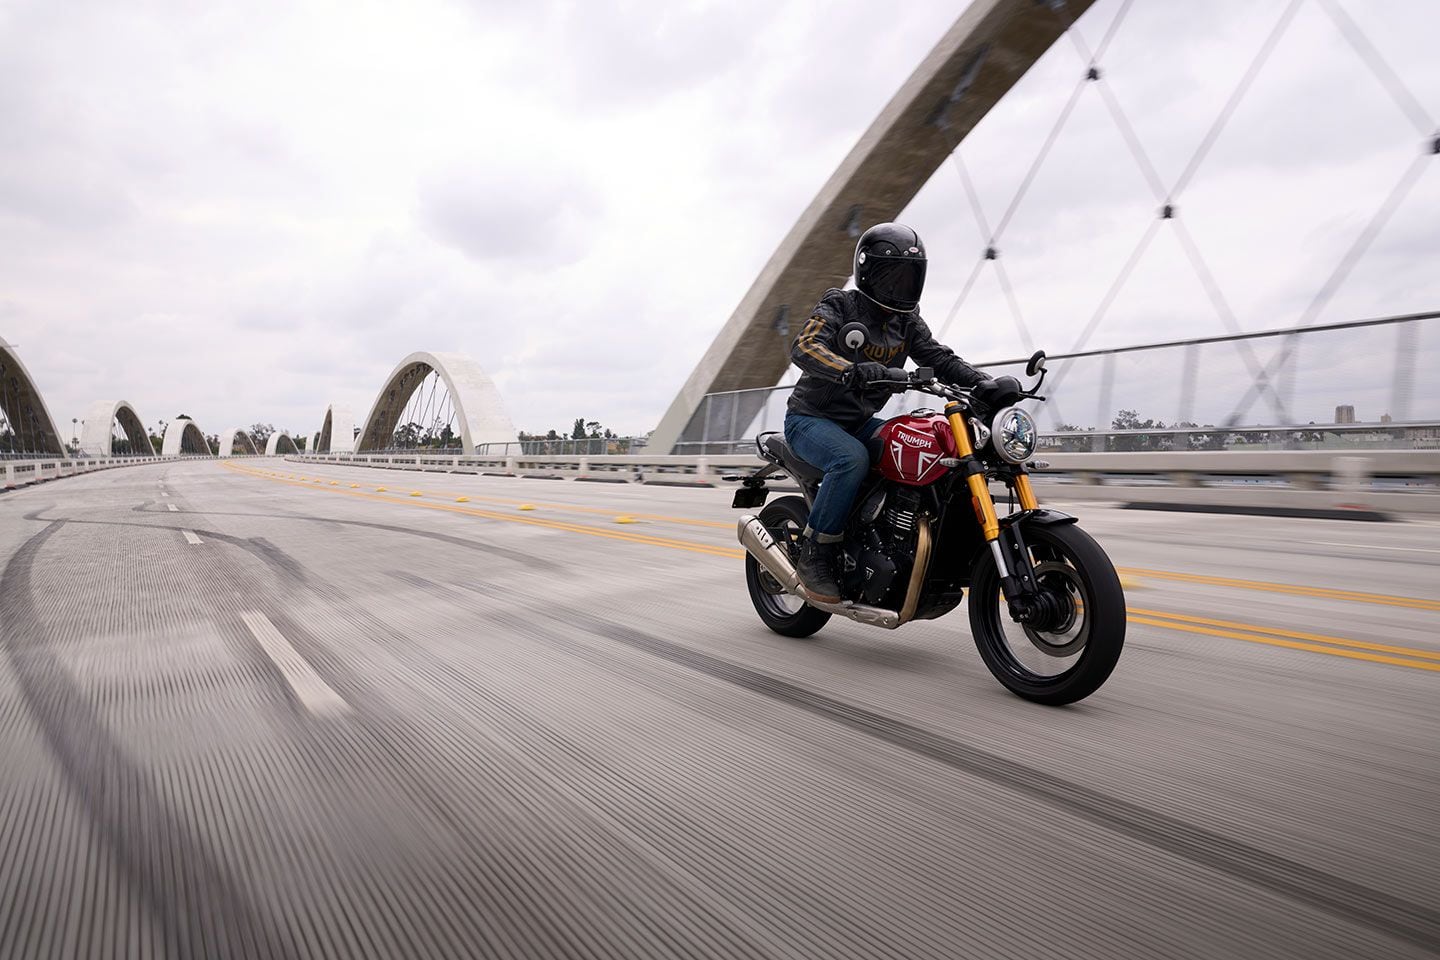 Triumph Launches Two All-New 400cc Single-Cylinder Models - Roadracing  World Magazine